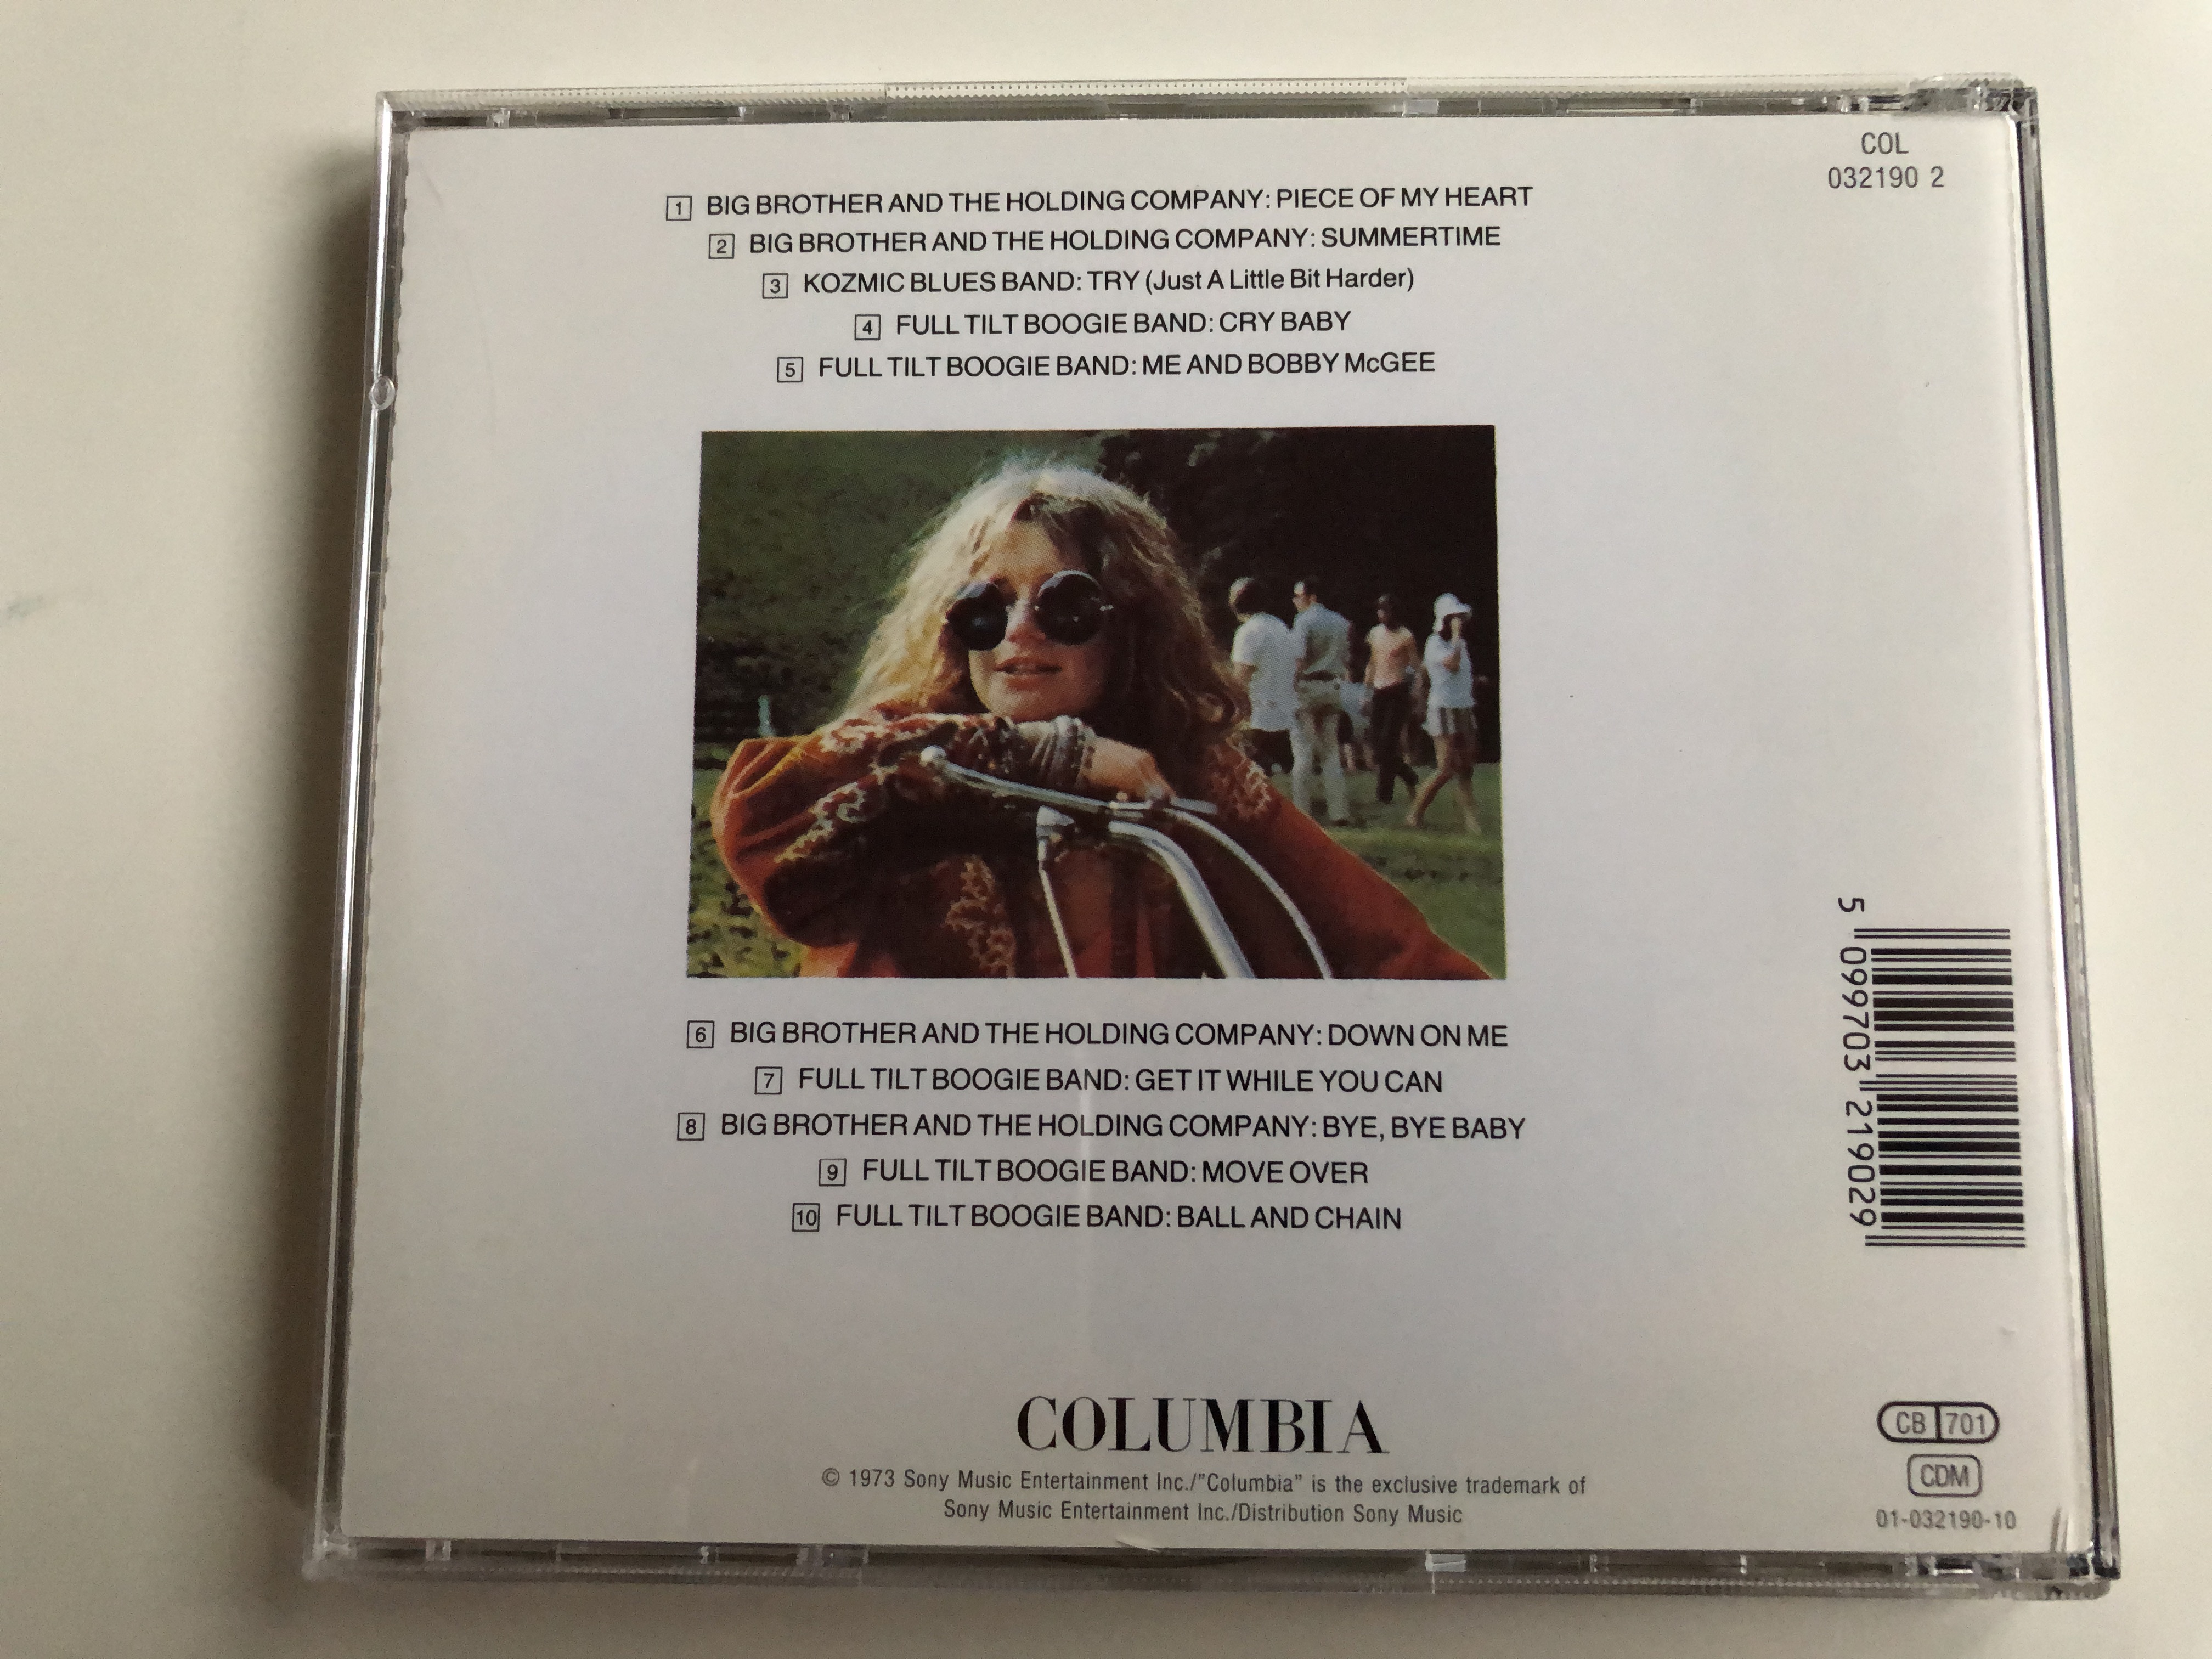 janis-joplin-s-greatest-hits-me-and-bobby-mcgee-down-on-me-piece-of-my-heart-try-just-a-little-bit-harder-bye-bye-baby-cbs-audio-cd-cd-32190-4-.jpg